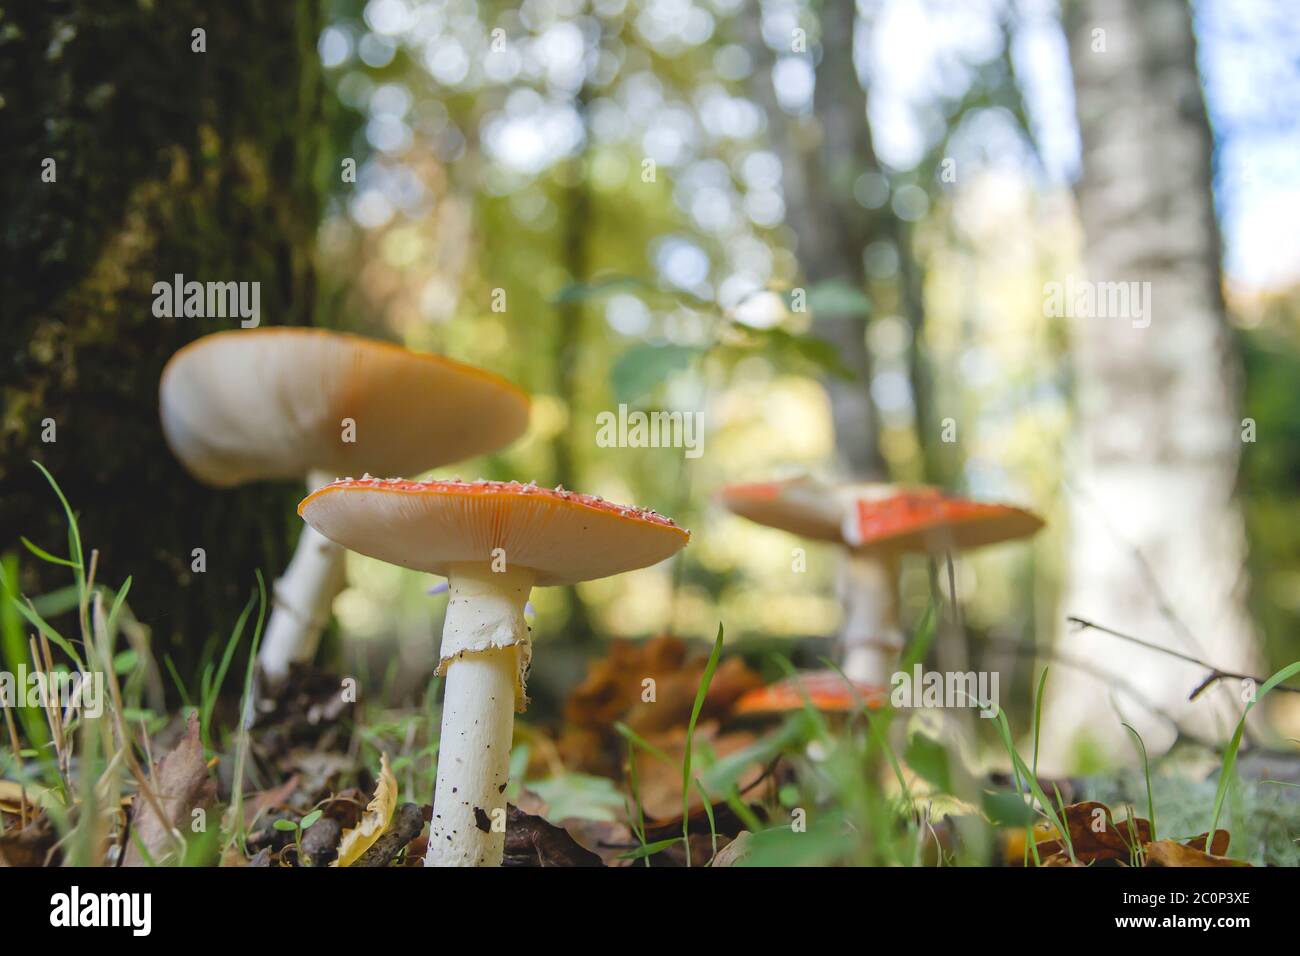 Amanita muscaria or fly agaric mushrooms growing wild in the autumnal woodlands Stock Photo